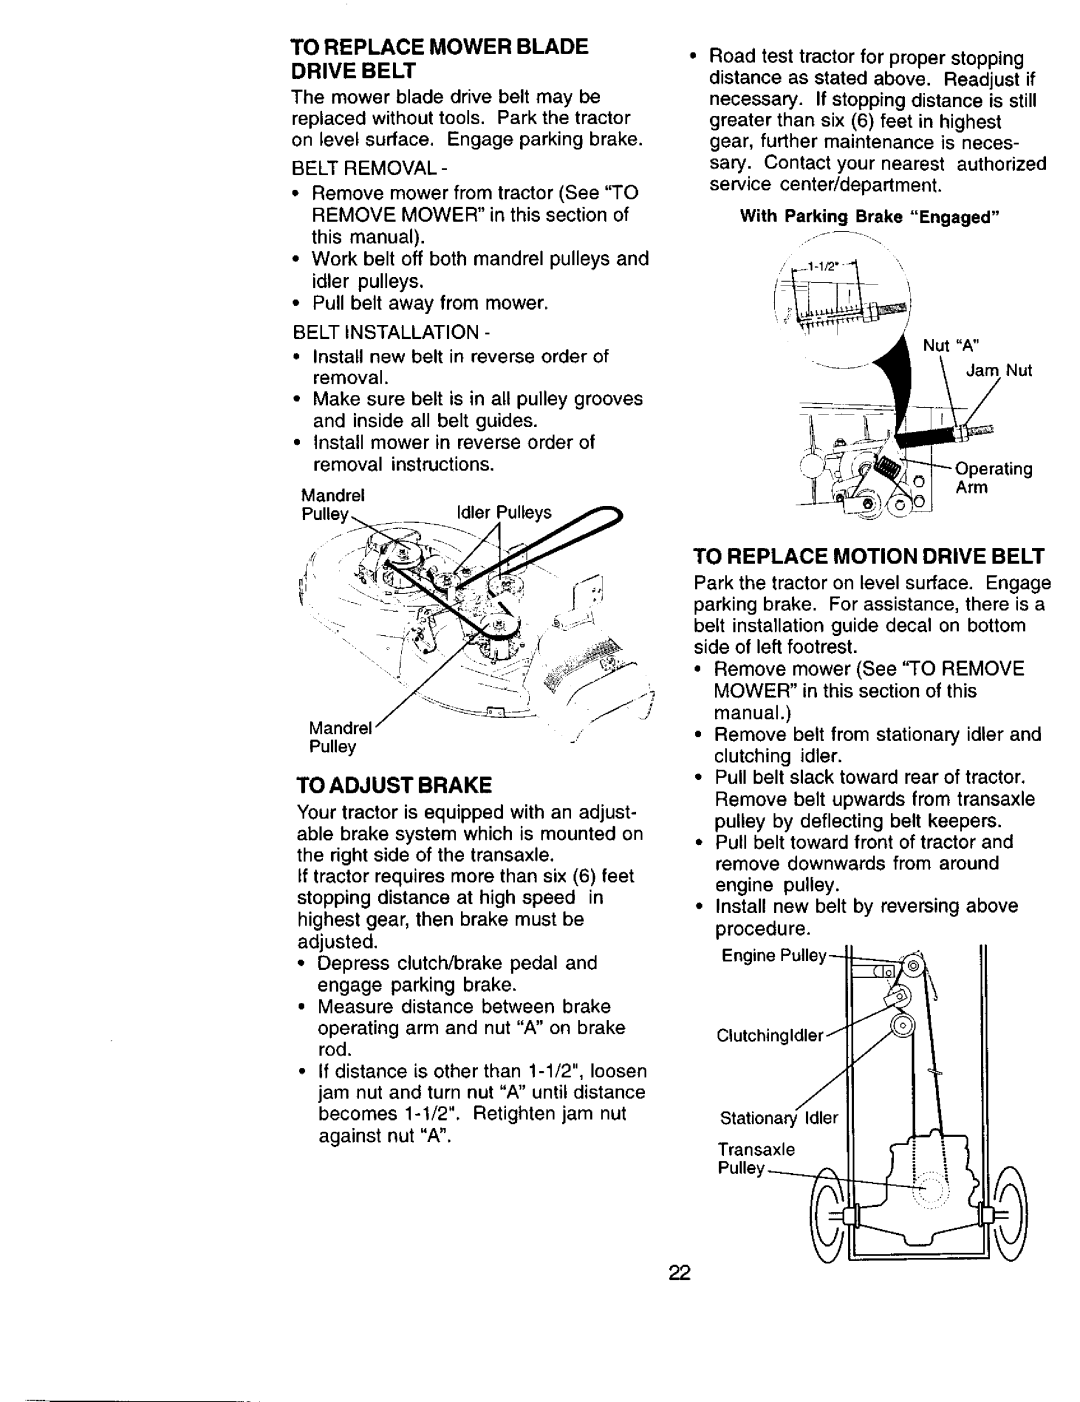 Sears 917.271051 owner manual To Replace Mower Blade Drive Belt, To Adjust Brake 